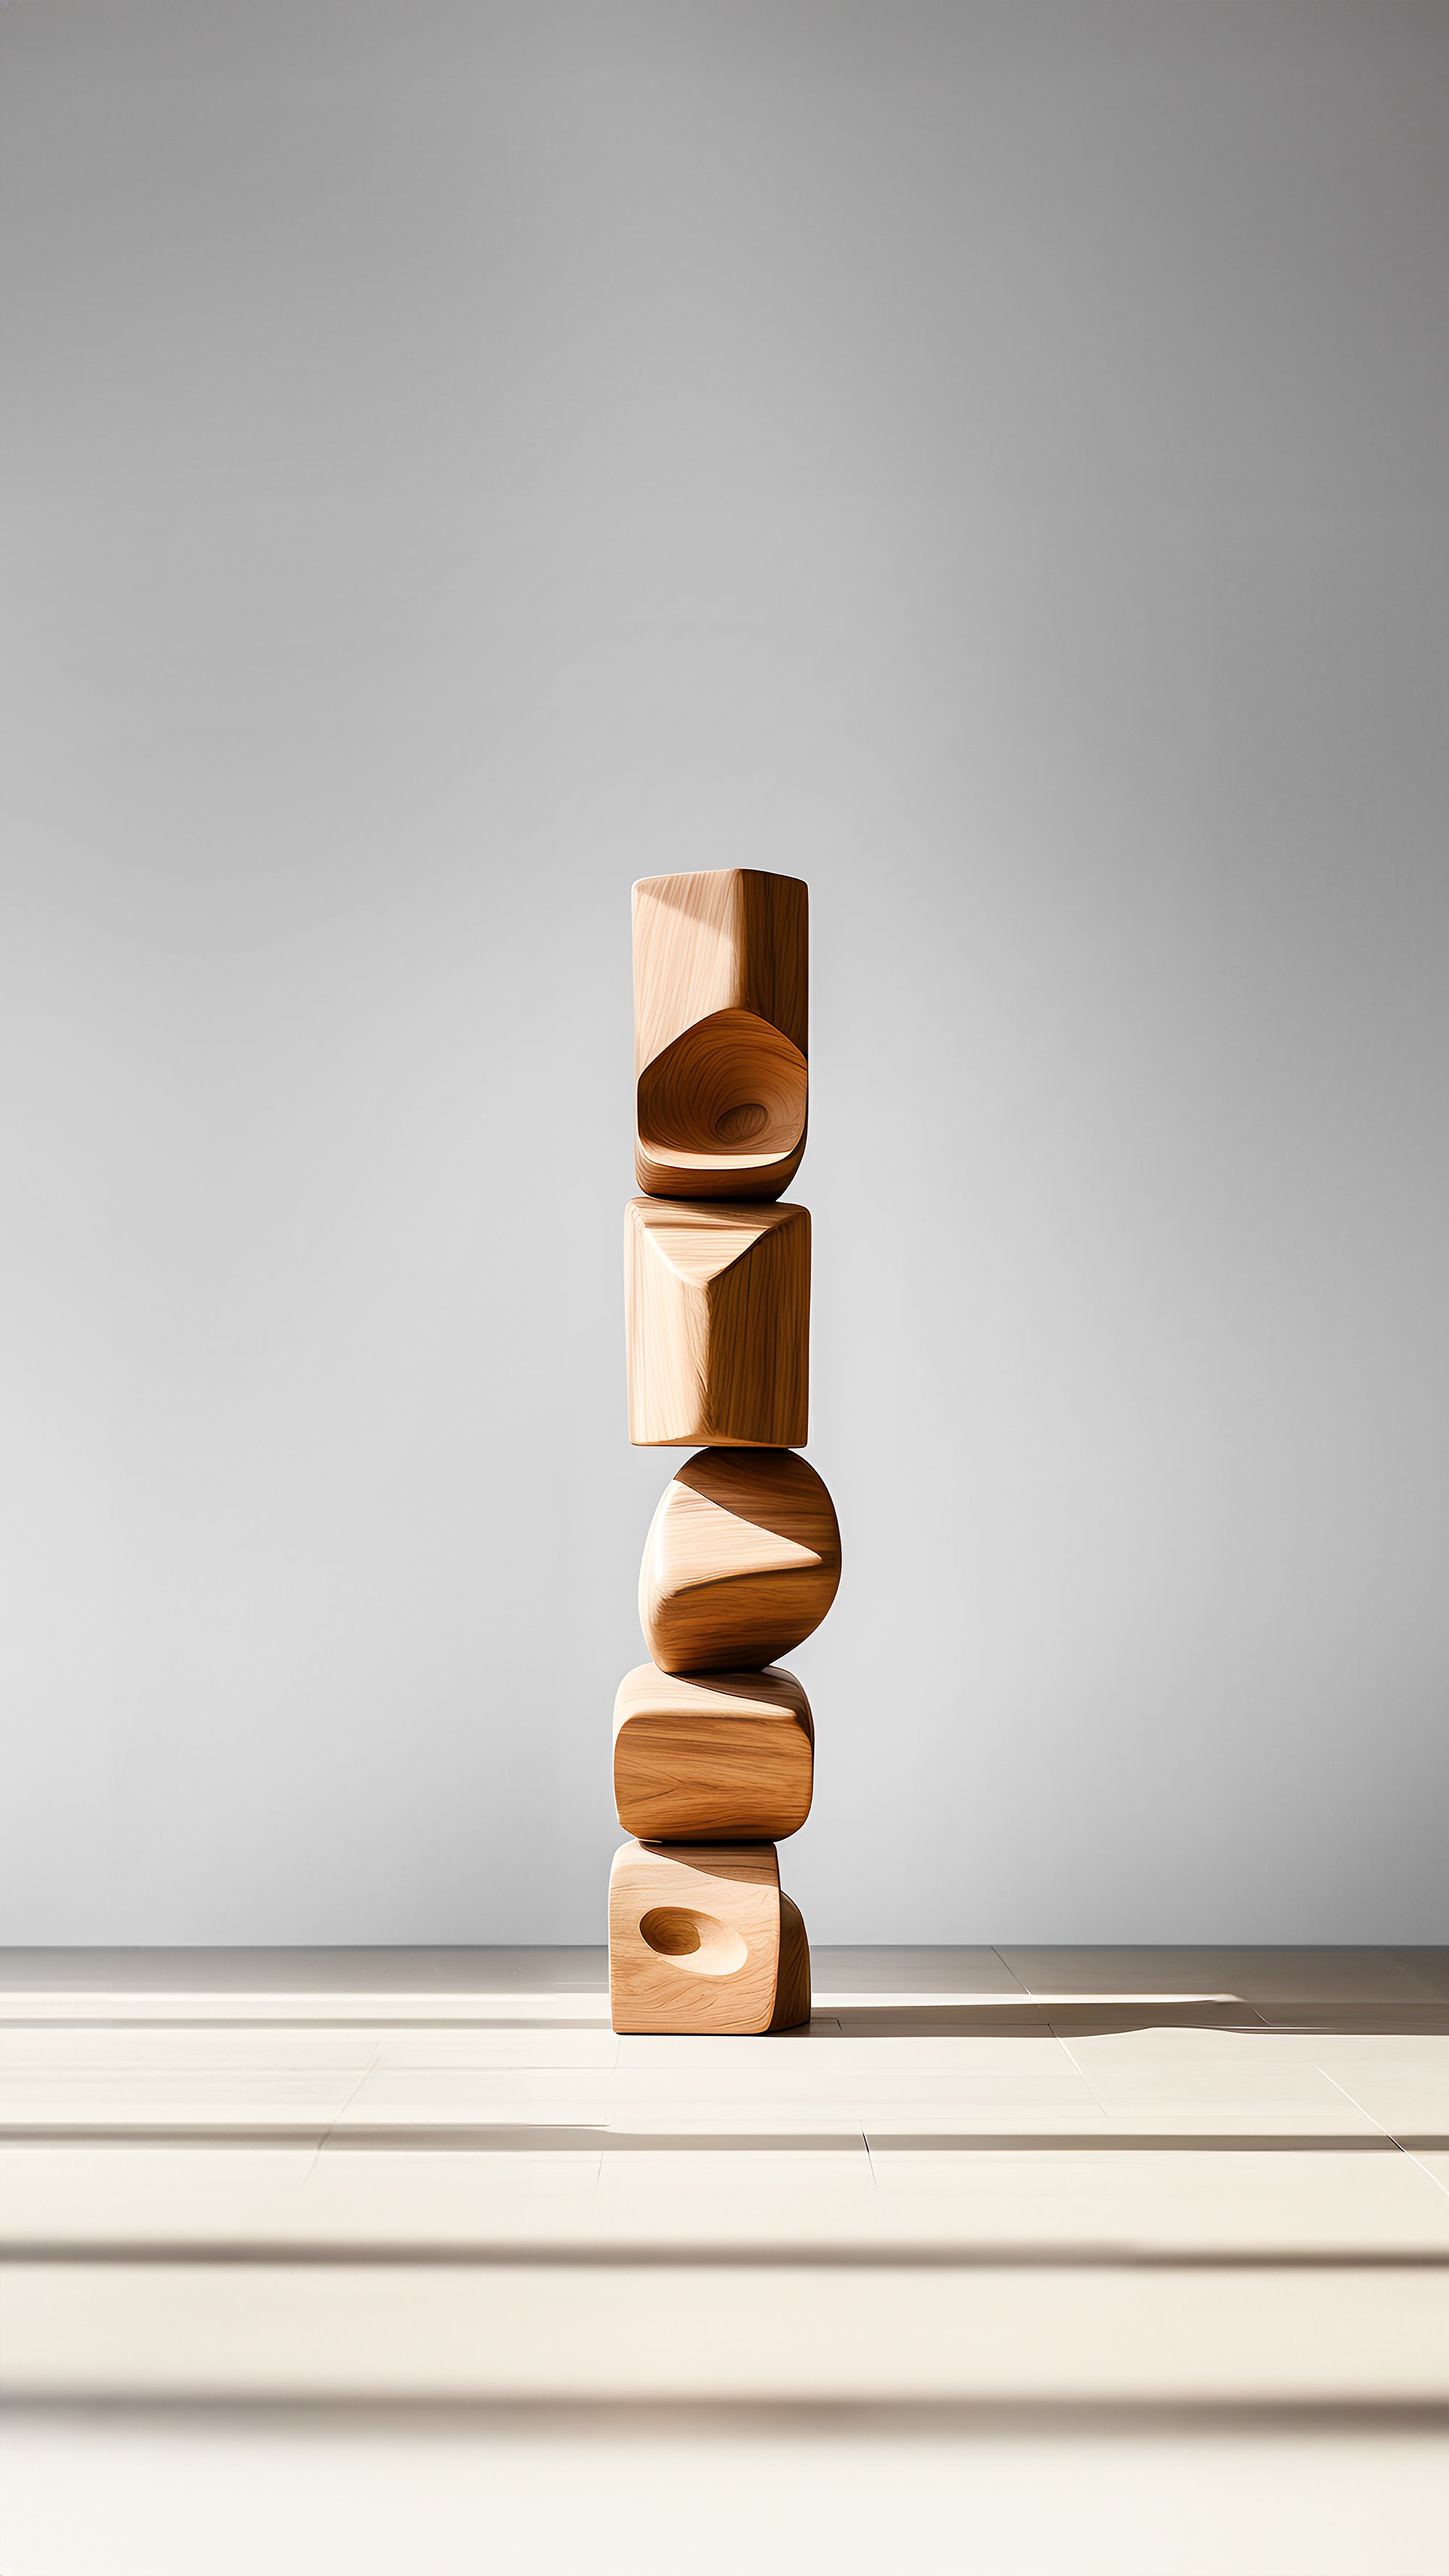 Carved Wooden Harmony Still Stand No63 Abstract Totem by Joel Escalona —4.jpg